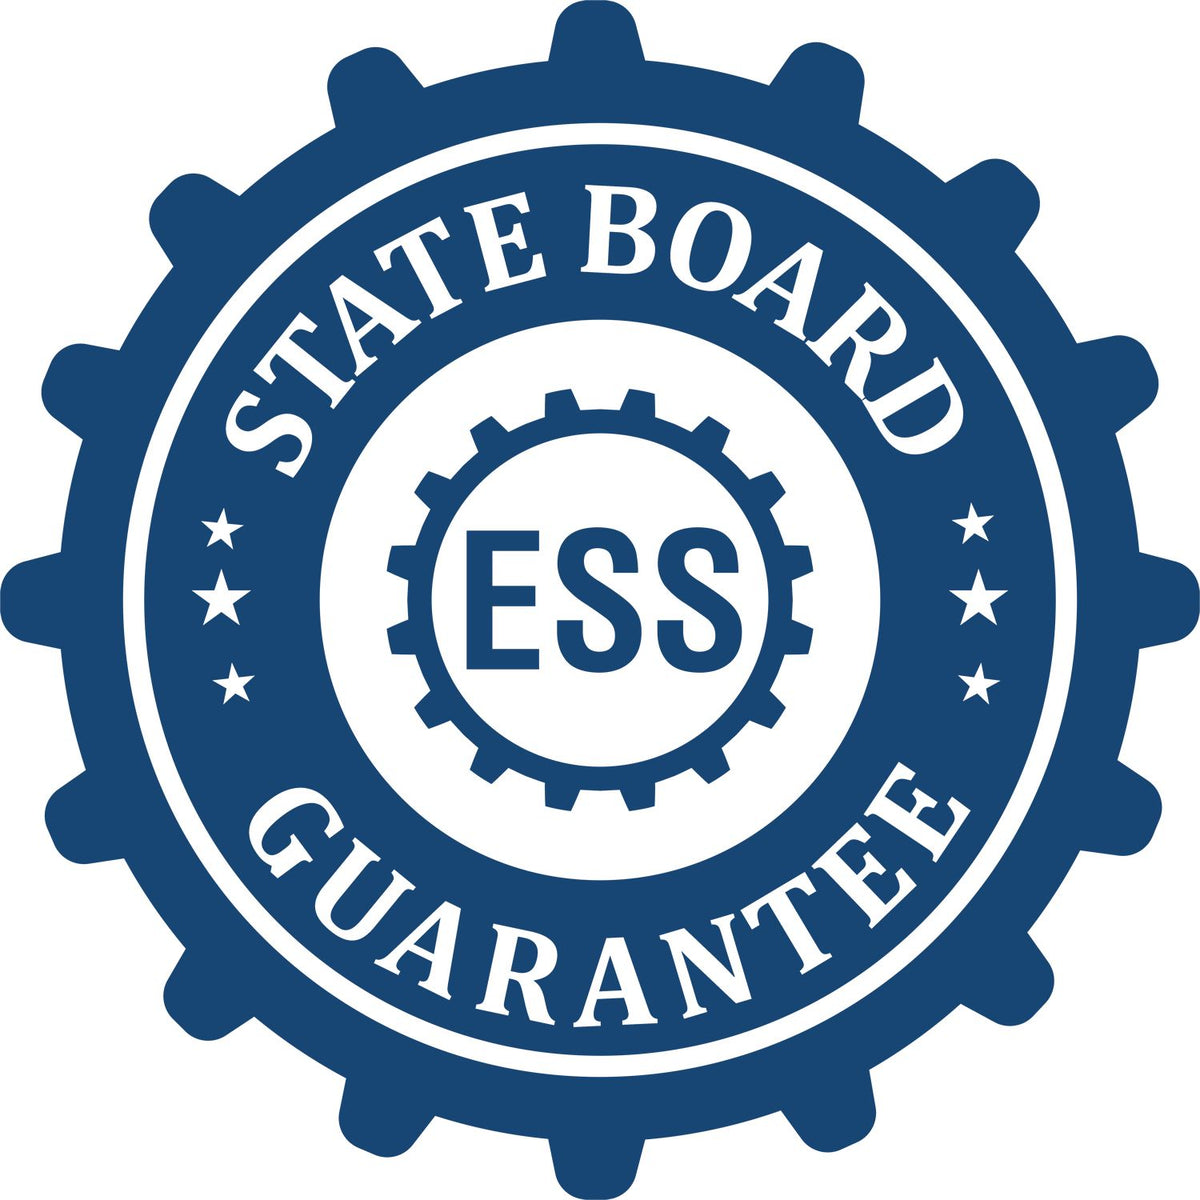 An emblem in a gear shape illustrating a state board guarantee for the Hybrid Kentucky Land Surveyor Seal